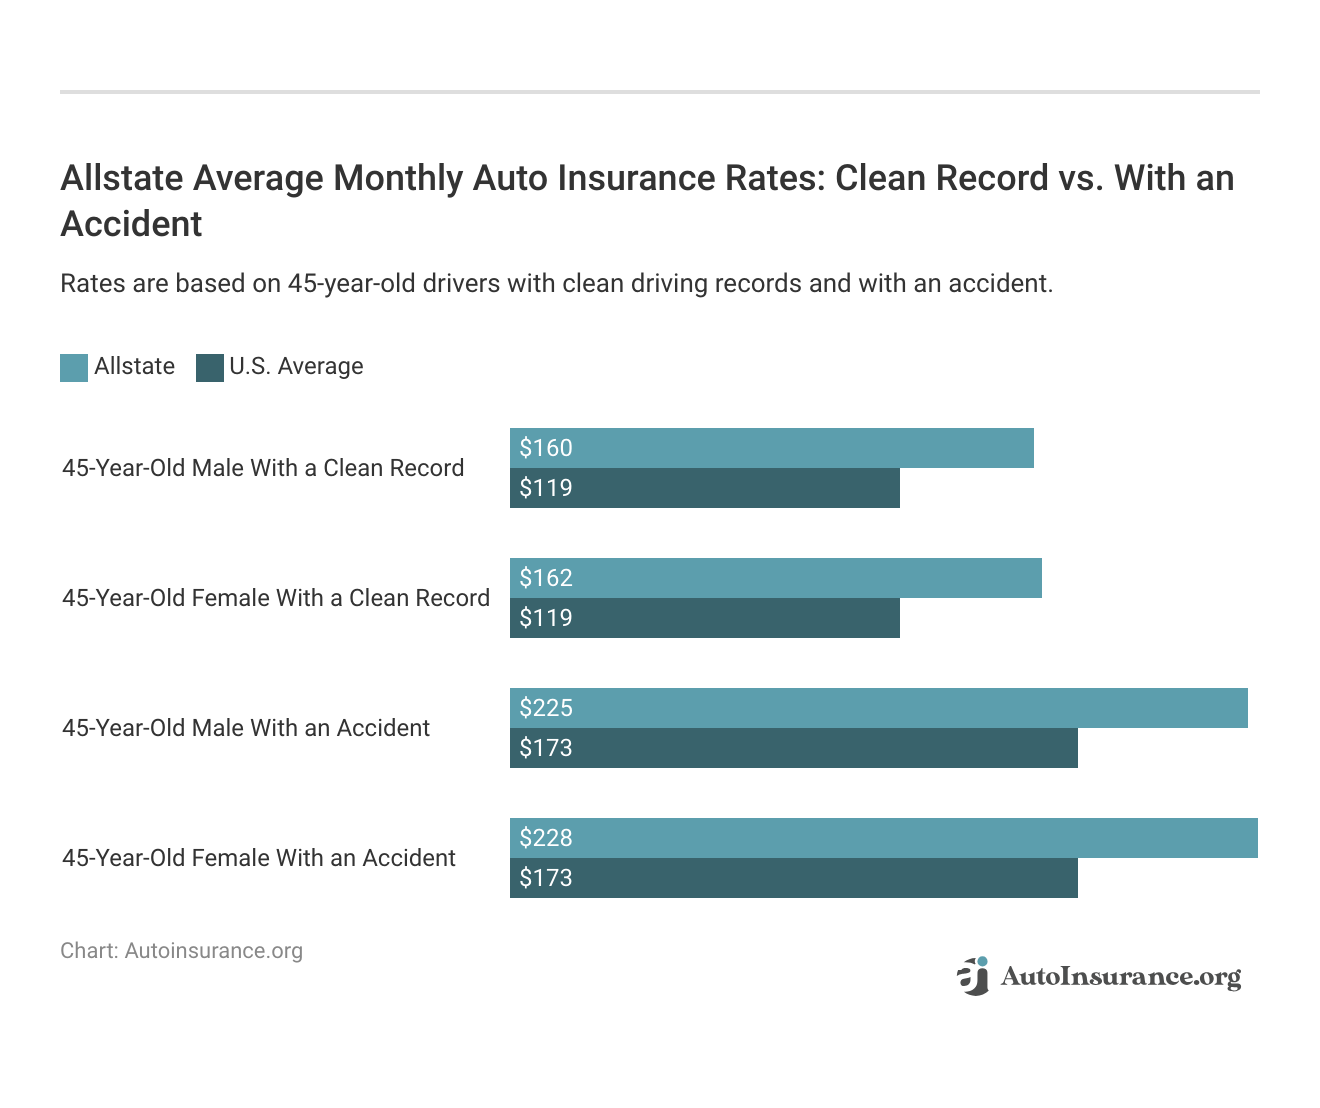 Allstate Average Monthly Auto Insurance Rates: Clean Record vs. With an Accident